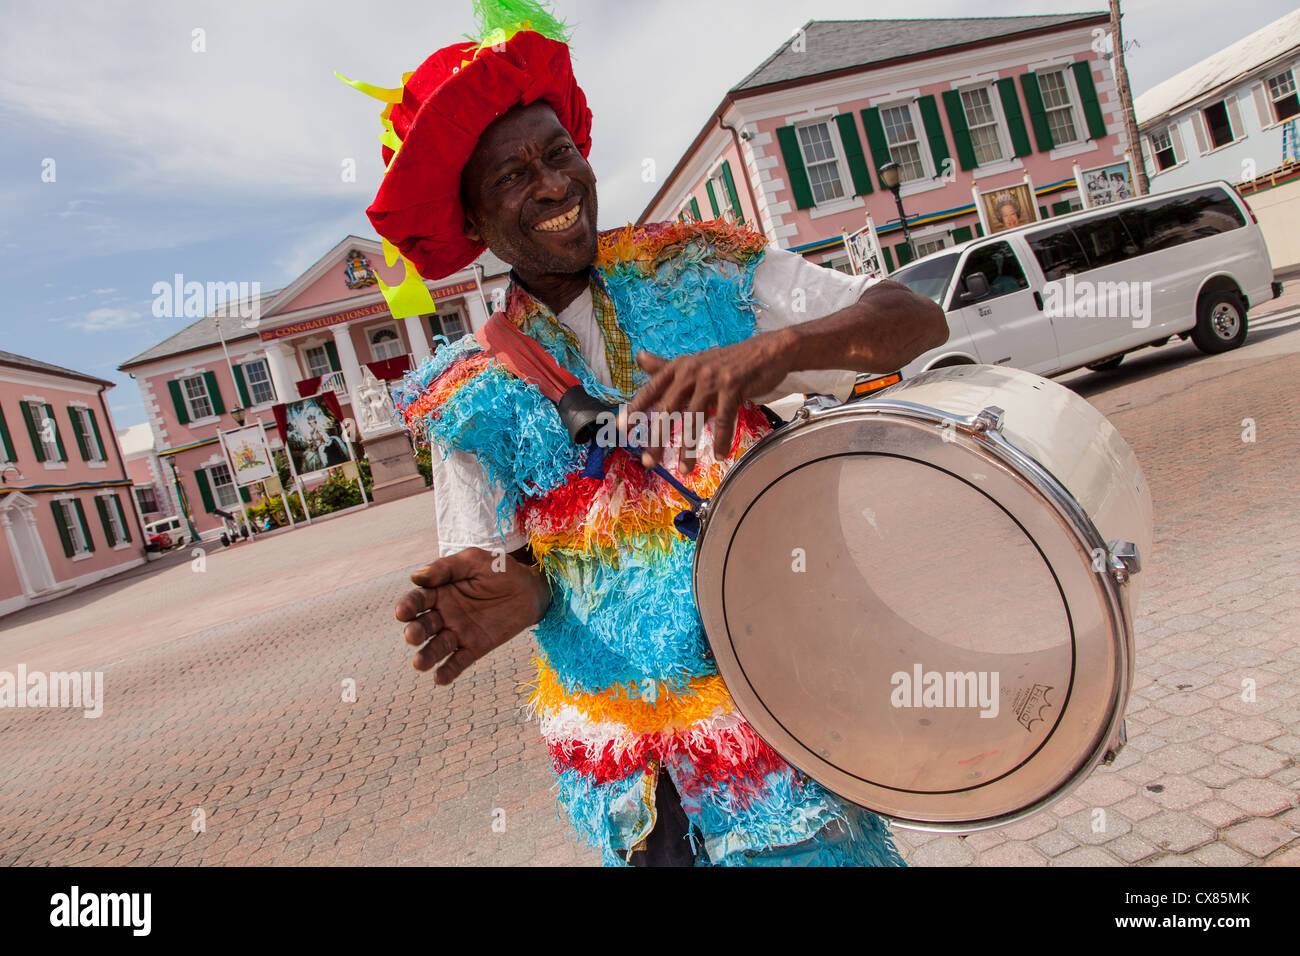 A performer in a Junkanoo costume performs in Parliament Square Nassau, Bahamas. Stock Photo